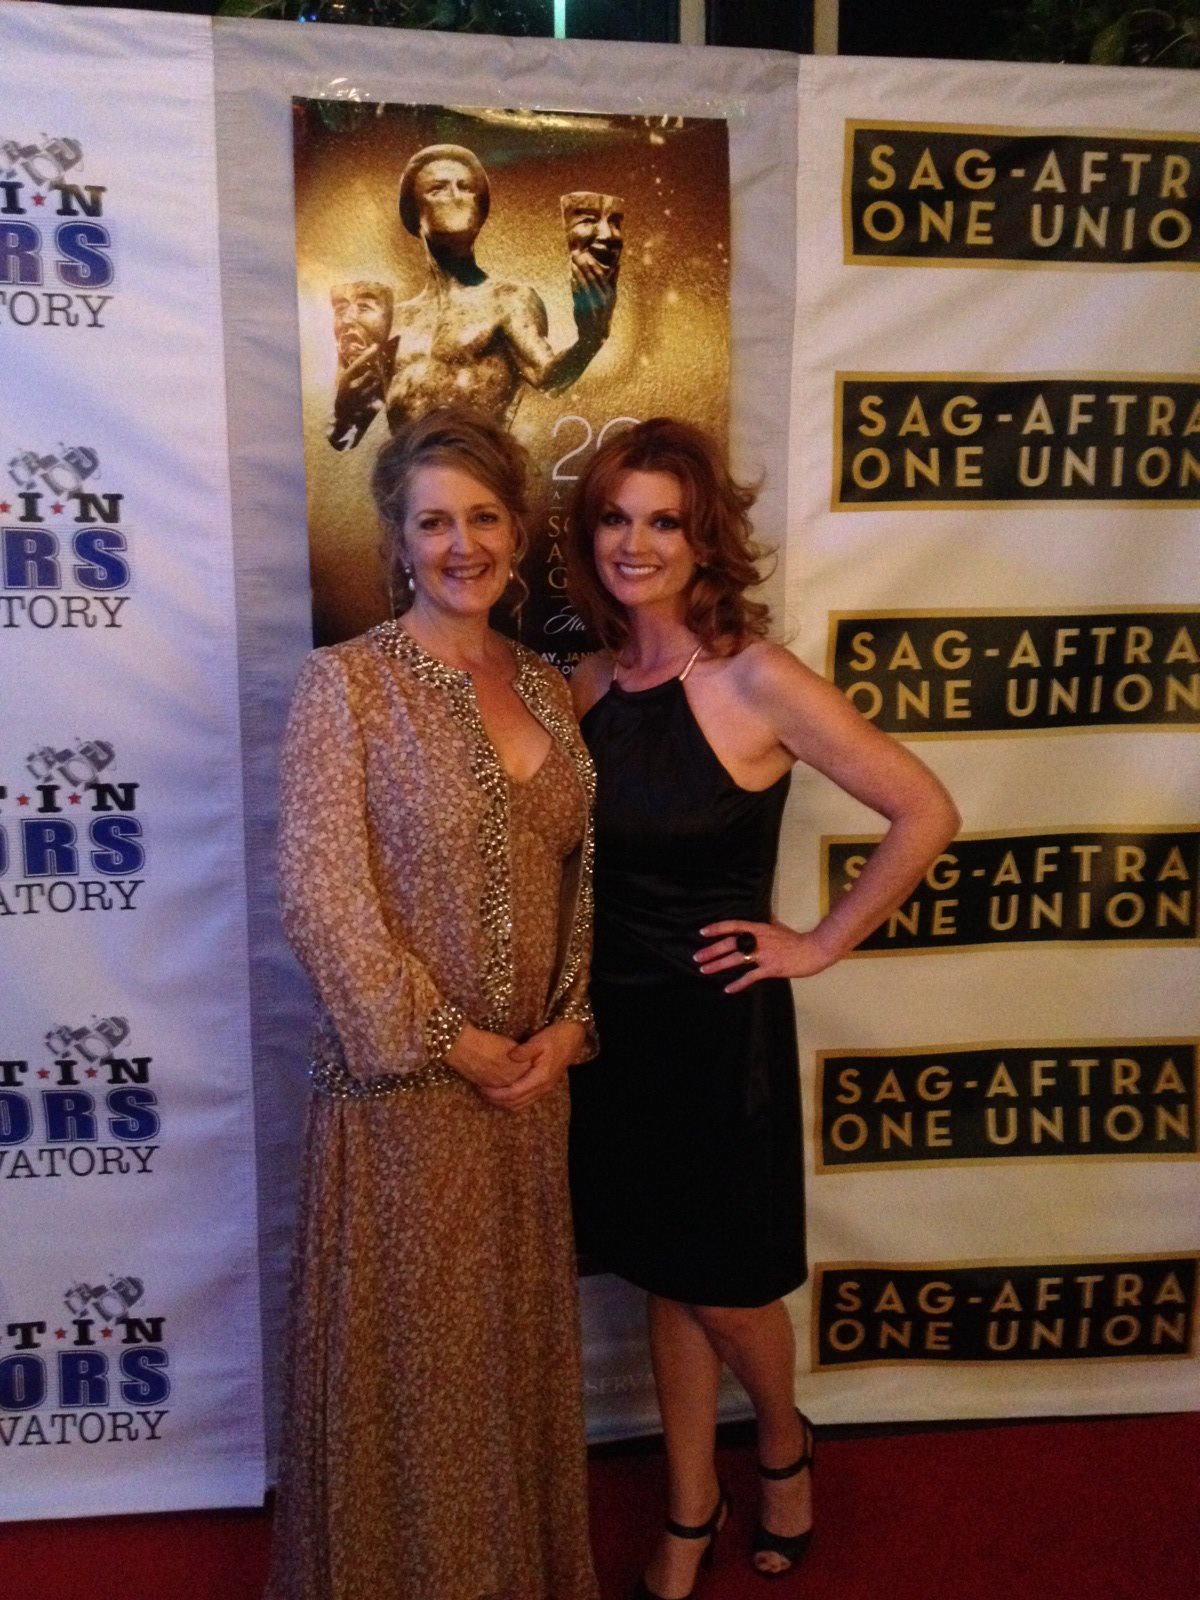 With Carol Hickey at the SAG Awards viewing party in Austin, TX.